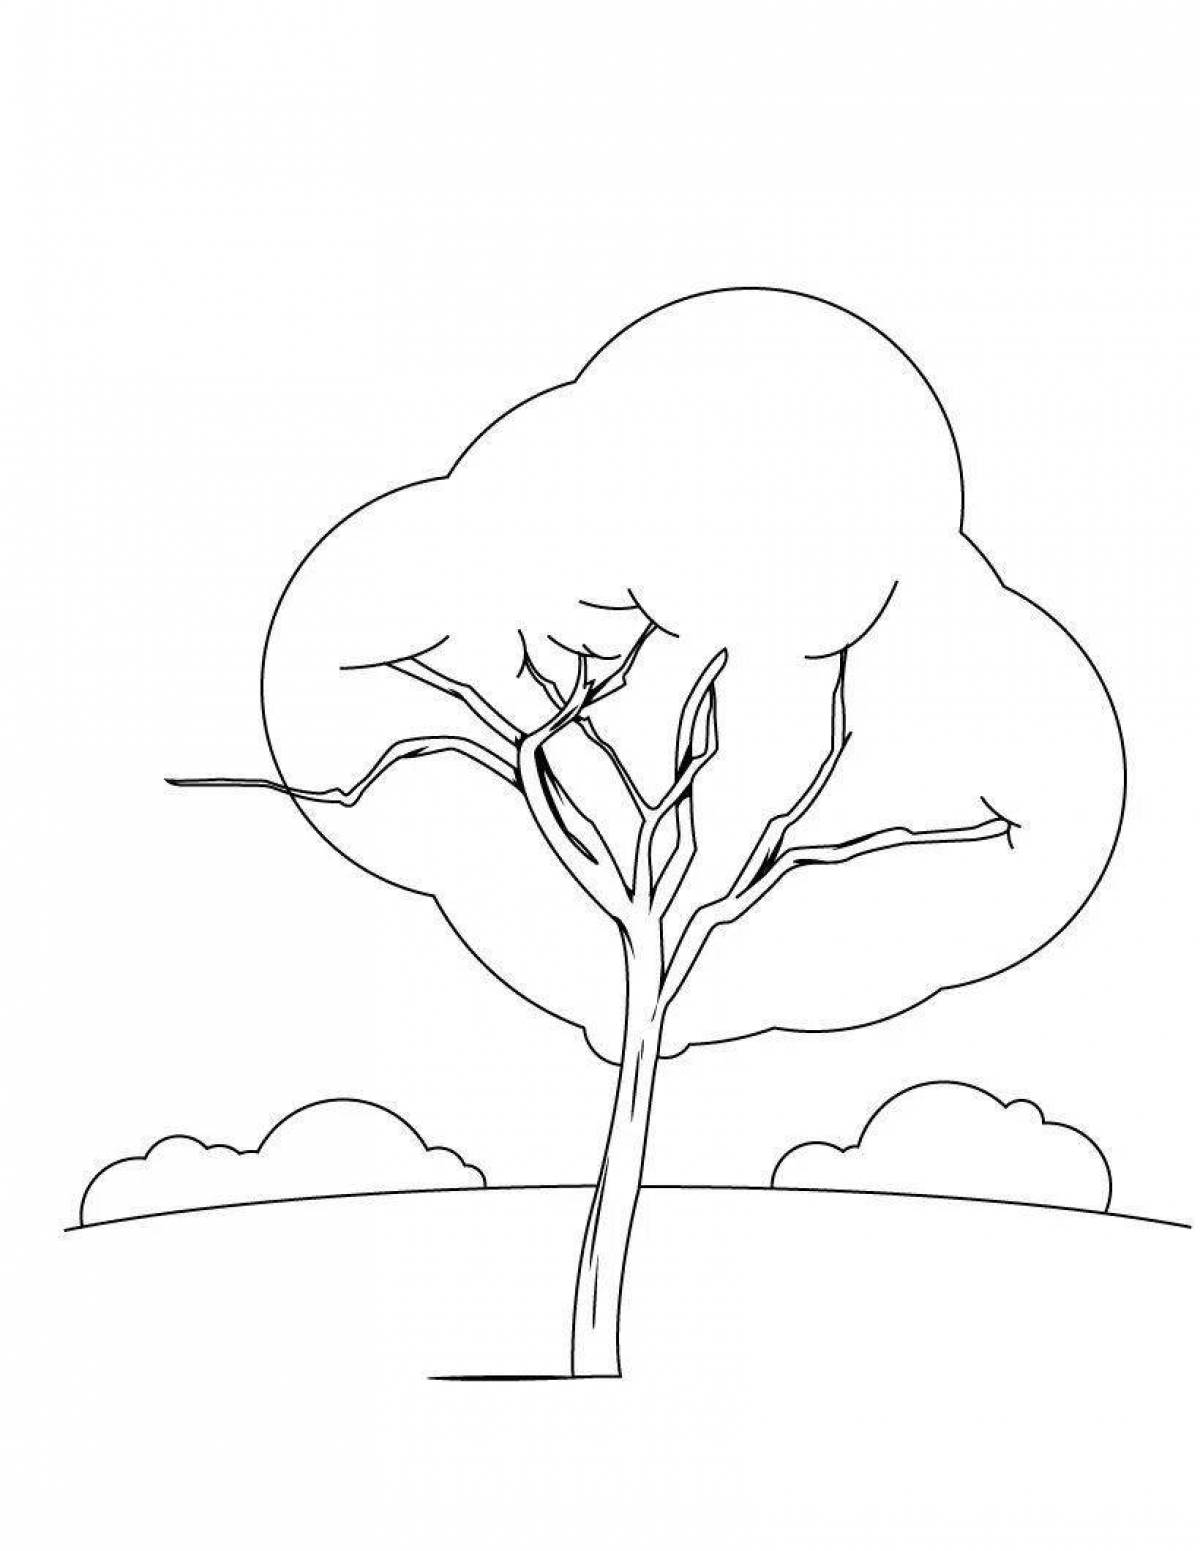 Amazing winter tree coloring page